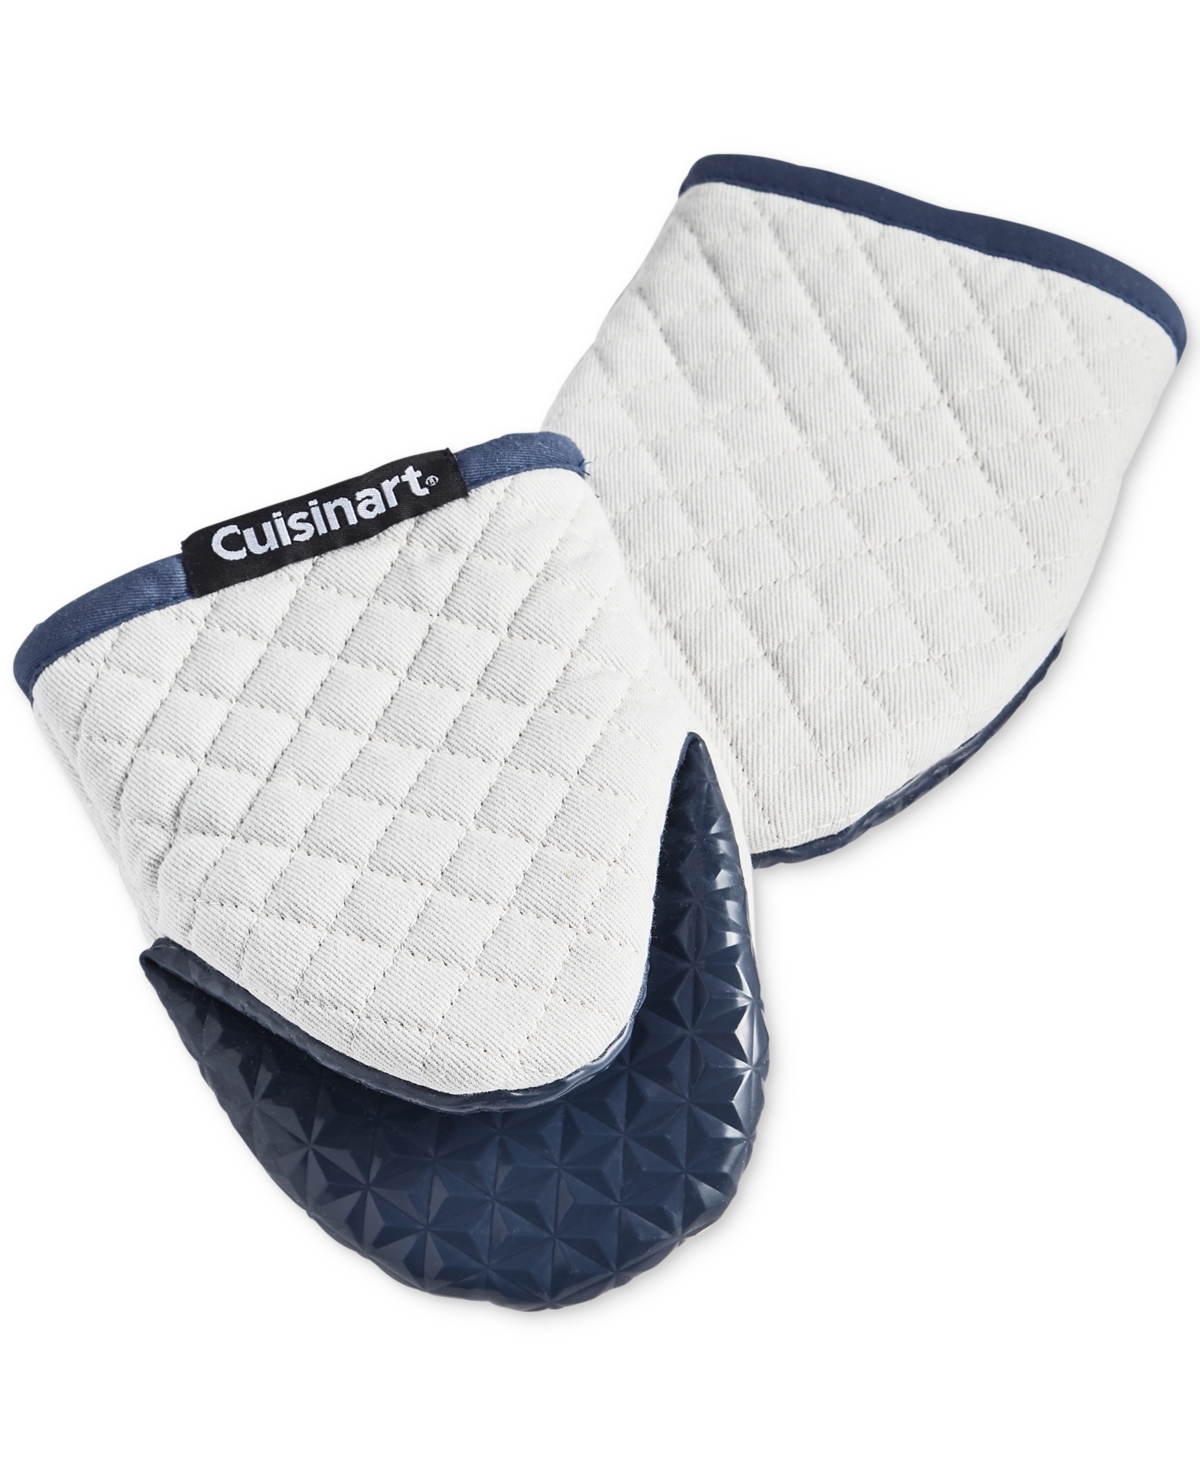 Cuisinart Mini Oven Mitts with Printed Words, Set of 2 - Macy's